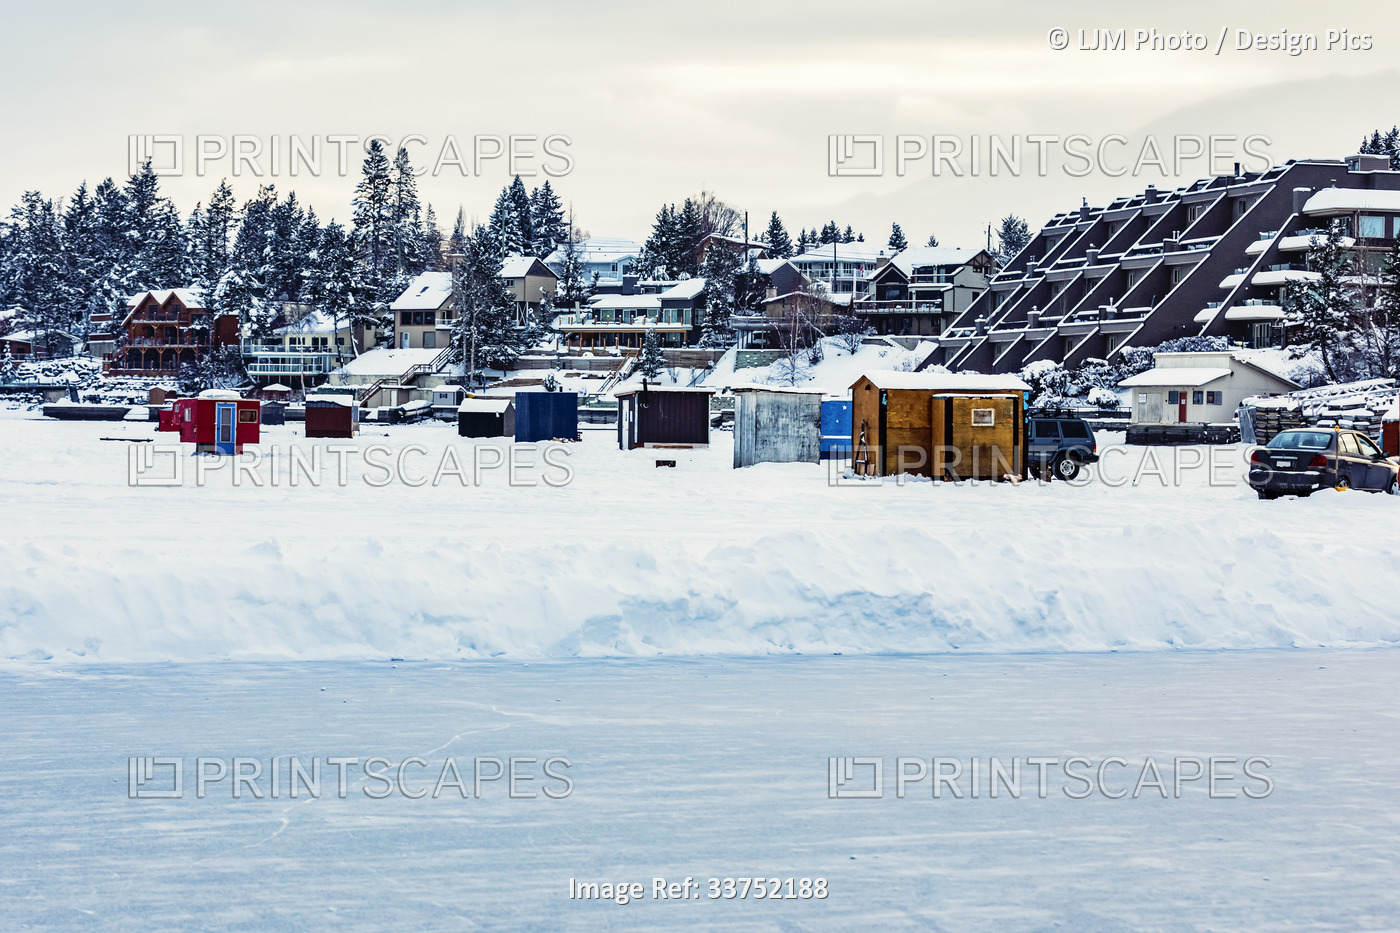 A view of a skating rink and ice fishing shacks and trailers on the shoreline ...